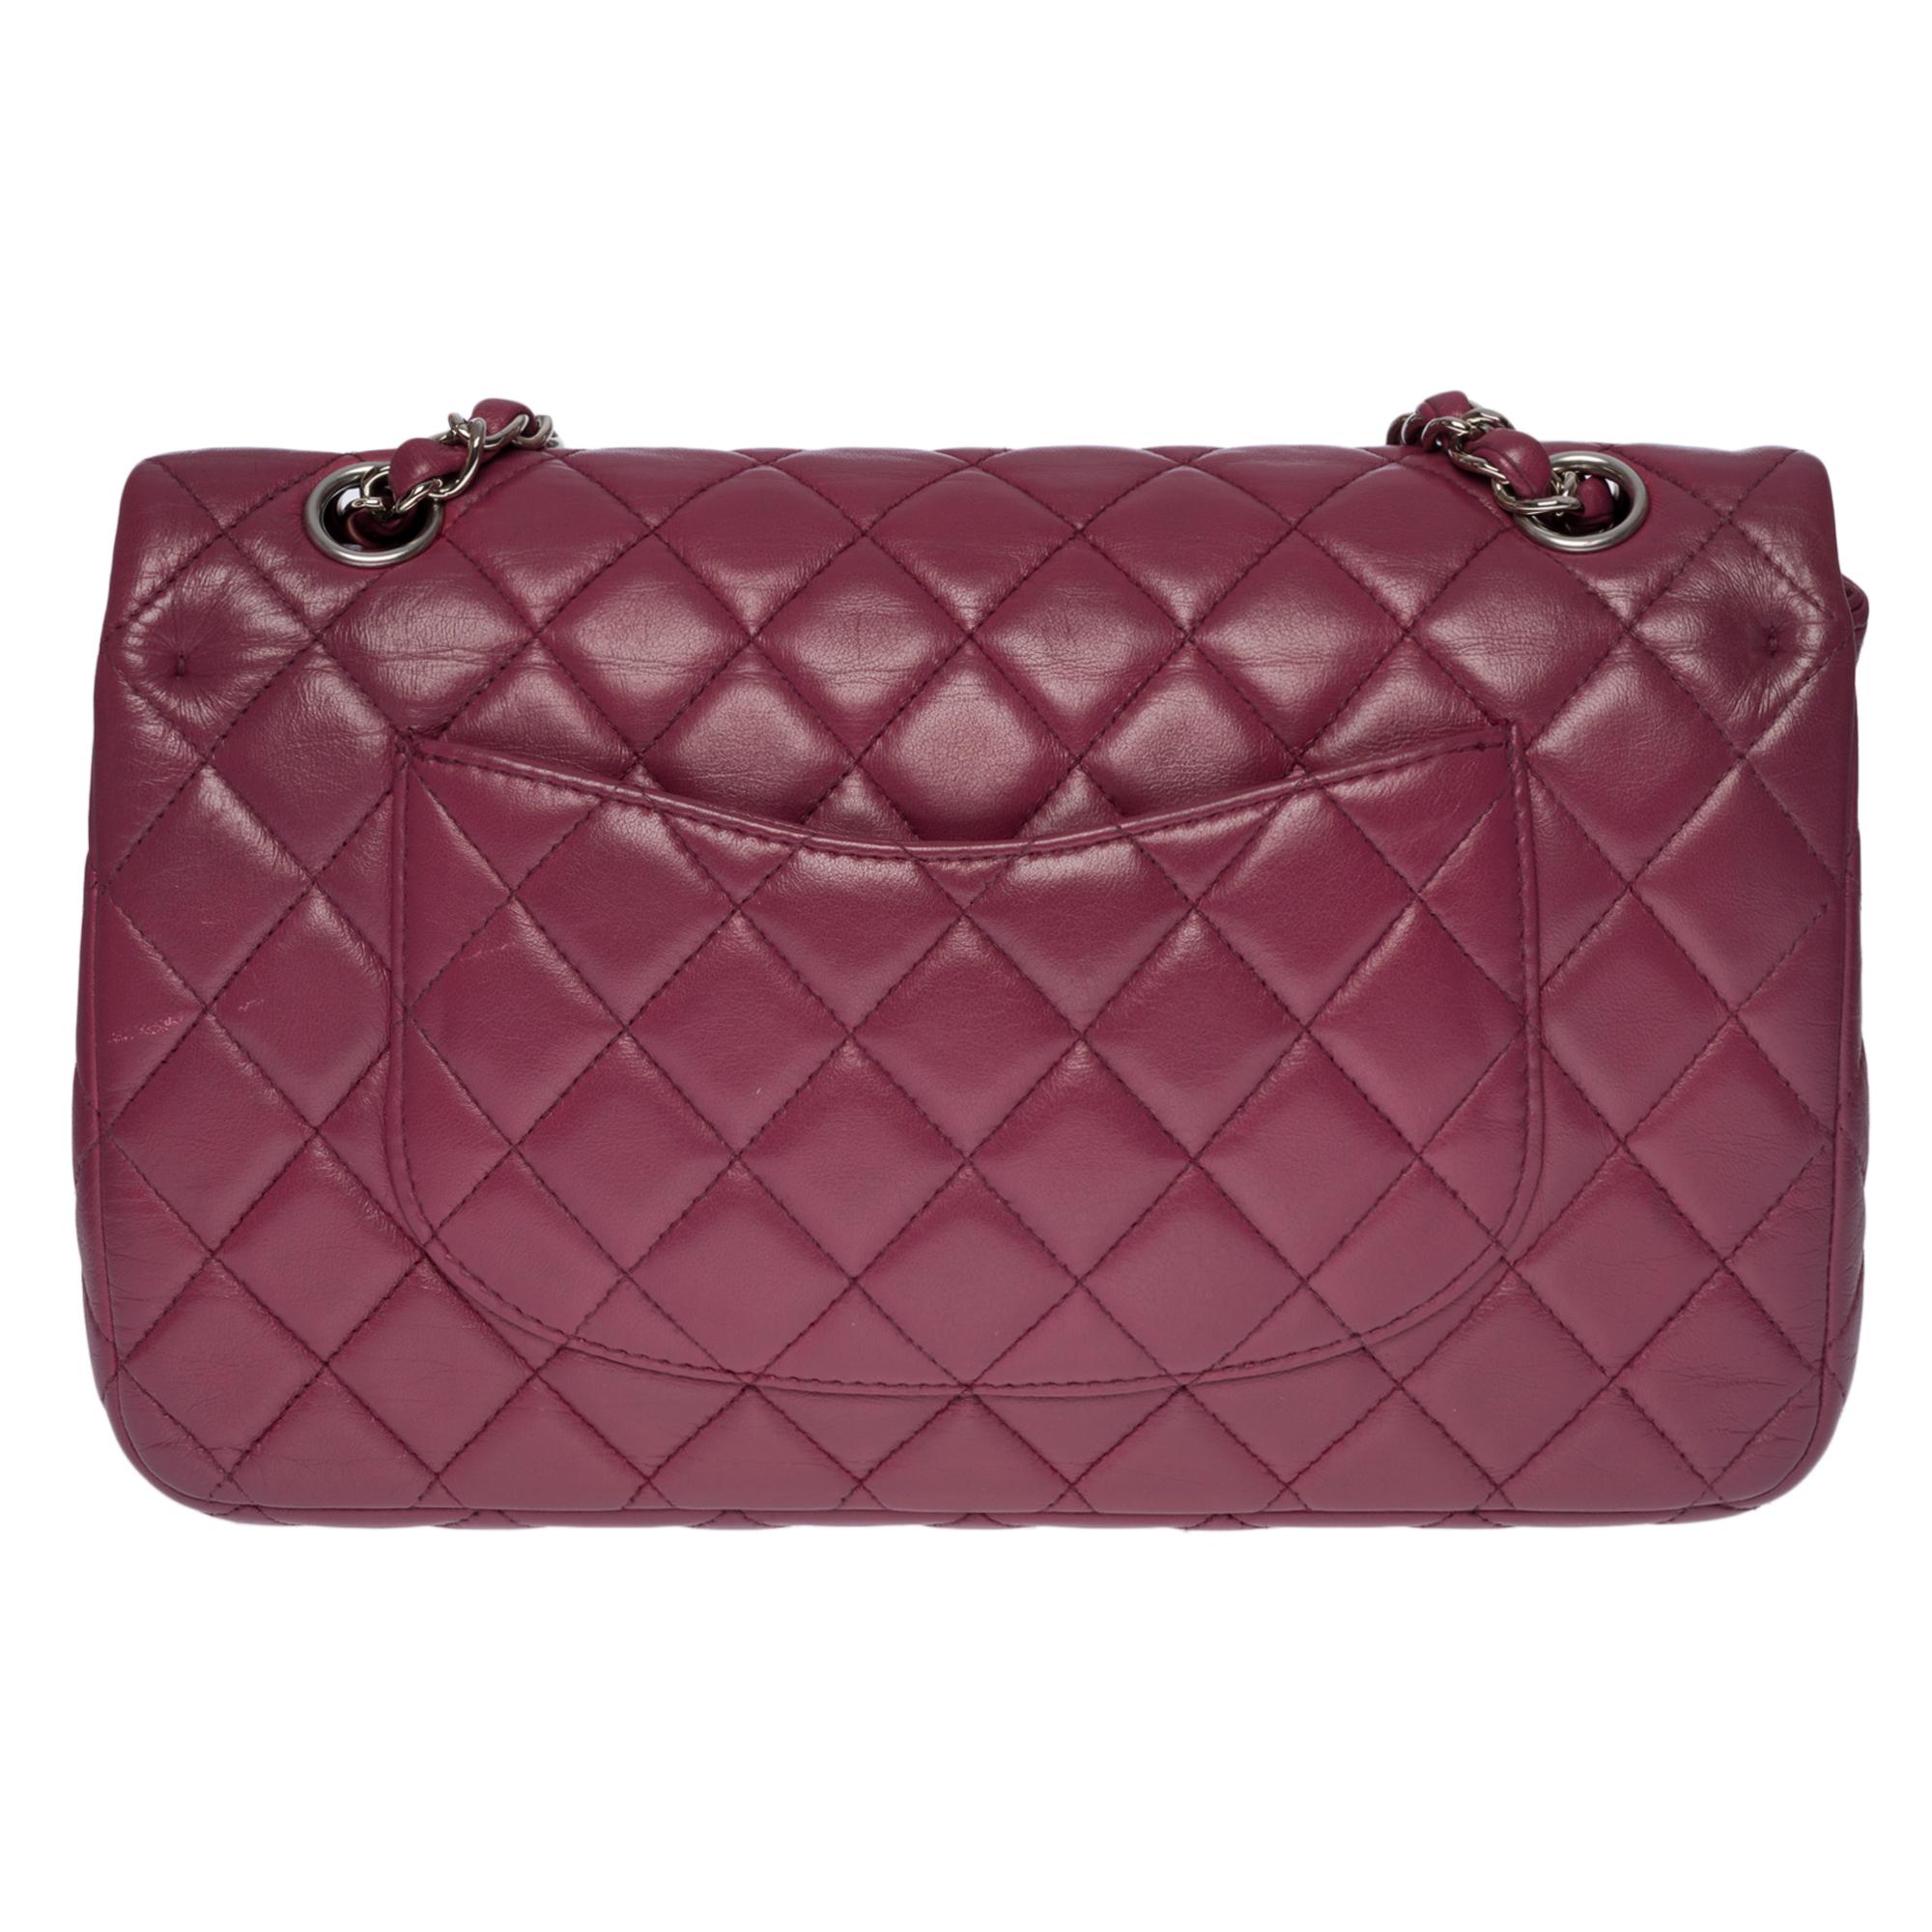 Stunning Chanel Timeless/Classic double flap shoulder bag in mauve quilted lamb leather, silver metal hardware, a silver metal chain handle interwoven with purple leather for a hand, shoulder and shoulder support

Silver metal flap closure
A patch